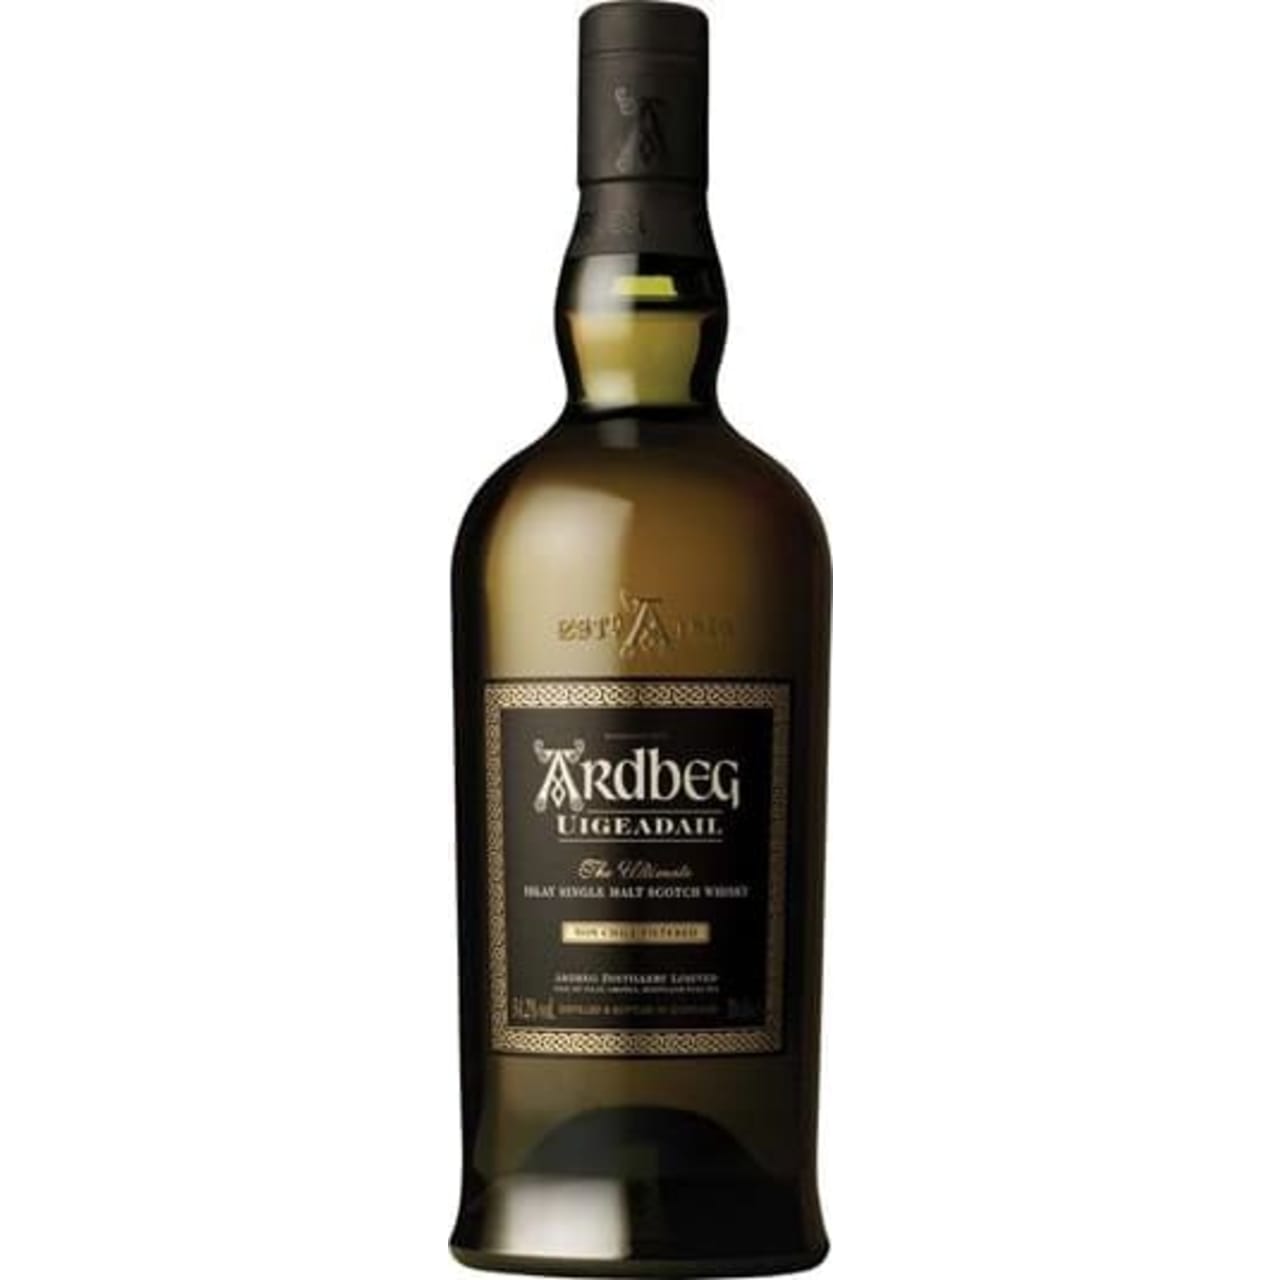 Traditional deep, smoky notes with luscious, raisiny tones of old ex-Sherry casks.